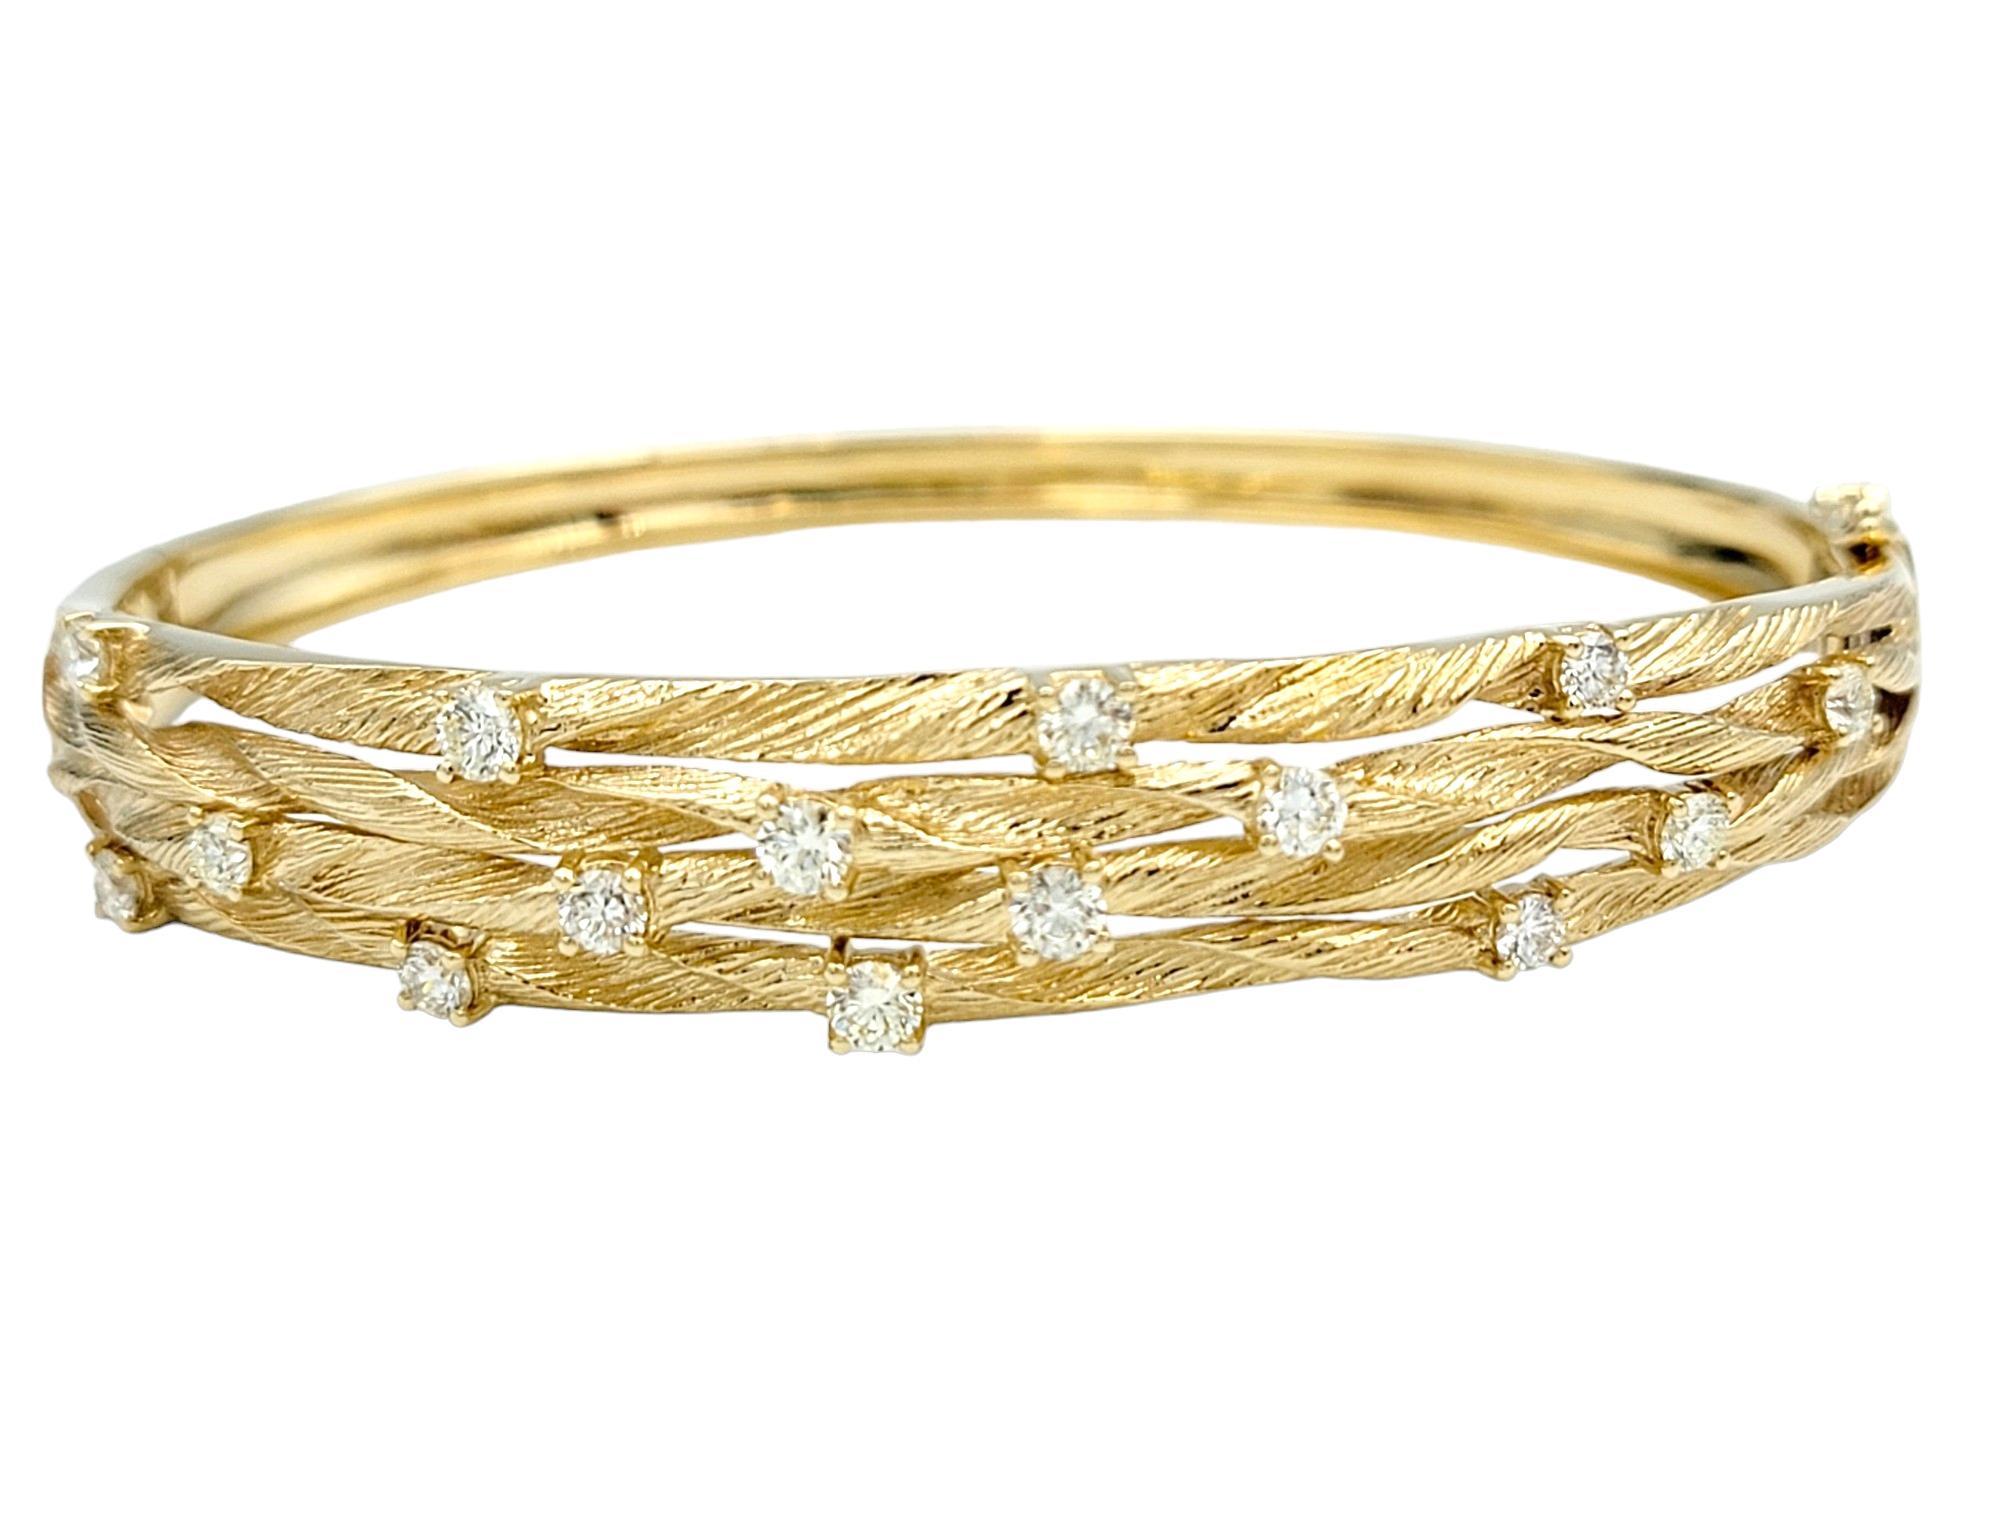 This Effy bangle bracelet, a part of the stunning D'Oro Collection, presents a seamless merge of classic design with a touch of contemporary allure. Crafted in lustrous 14 karat yellow gold, this bangle exudes a timeless elegance. The defining